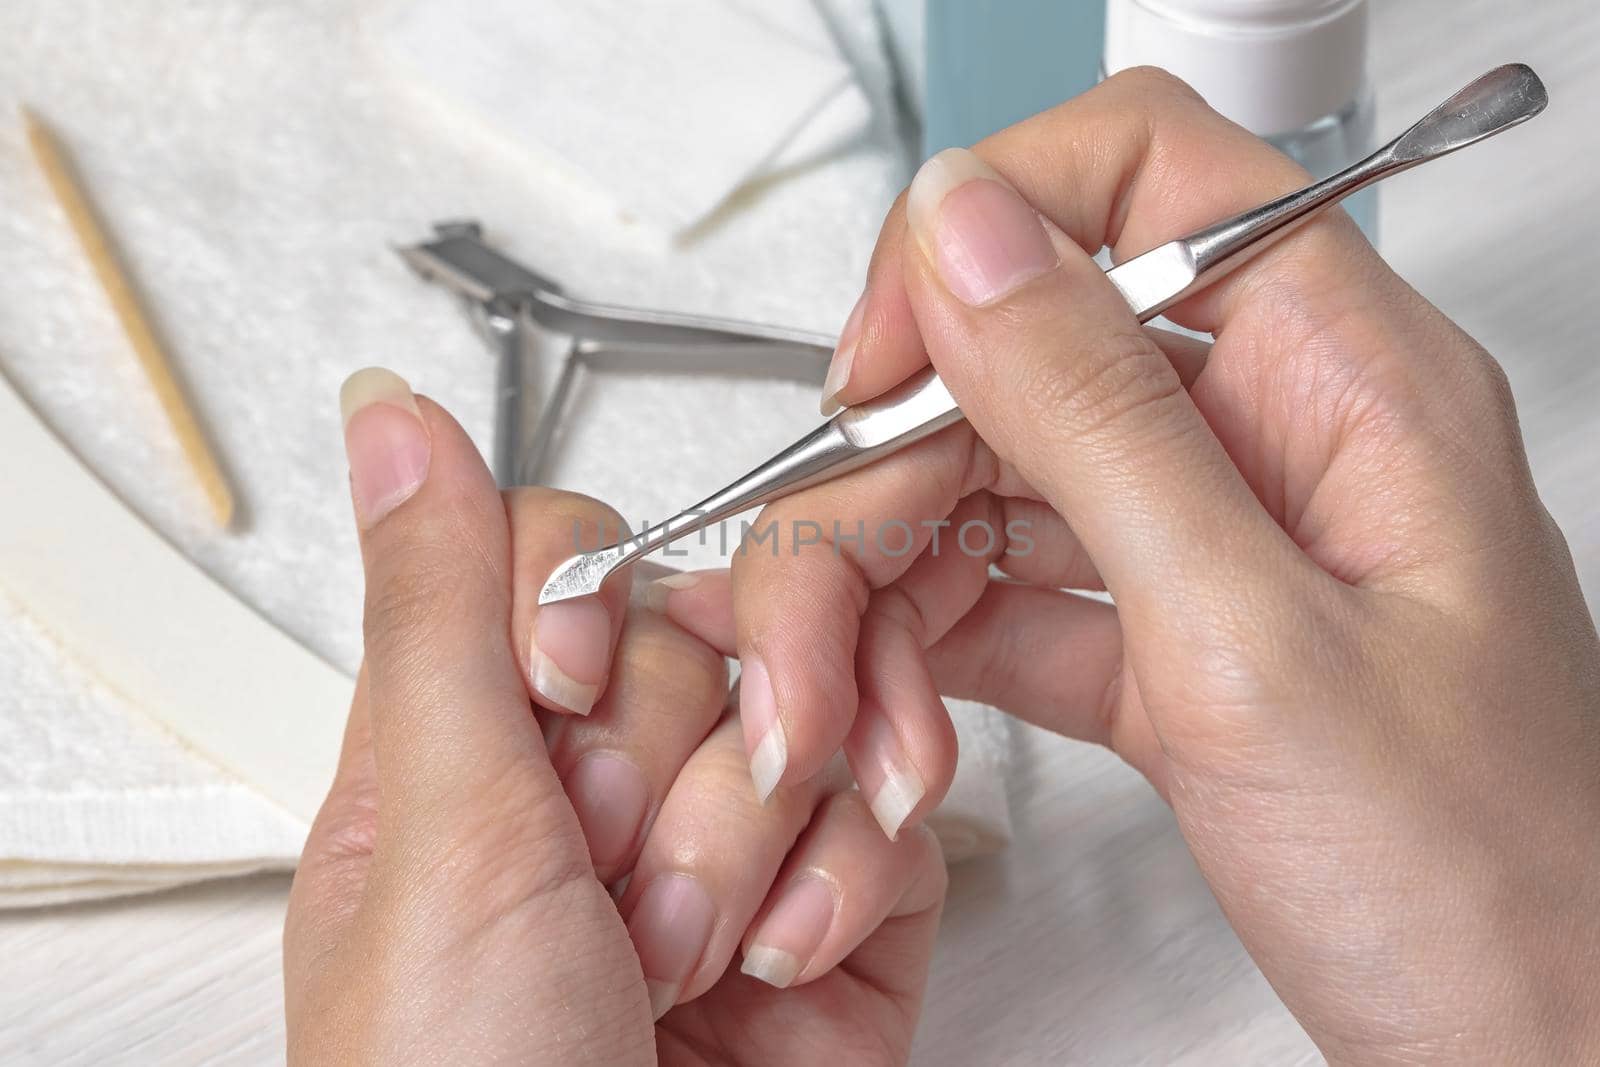 Manicure.Push back the cuticle with a metal pusher.Getting injured during manicure. Skin care,hands,nails,hygiene.Spa salon, nail salon.Home care. Beauty.Women's hands